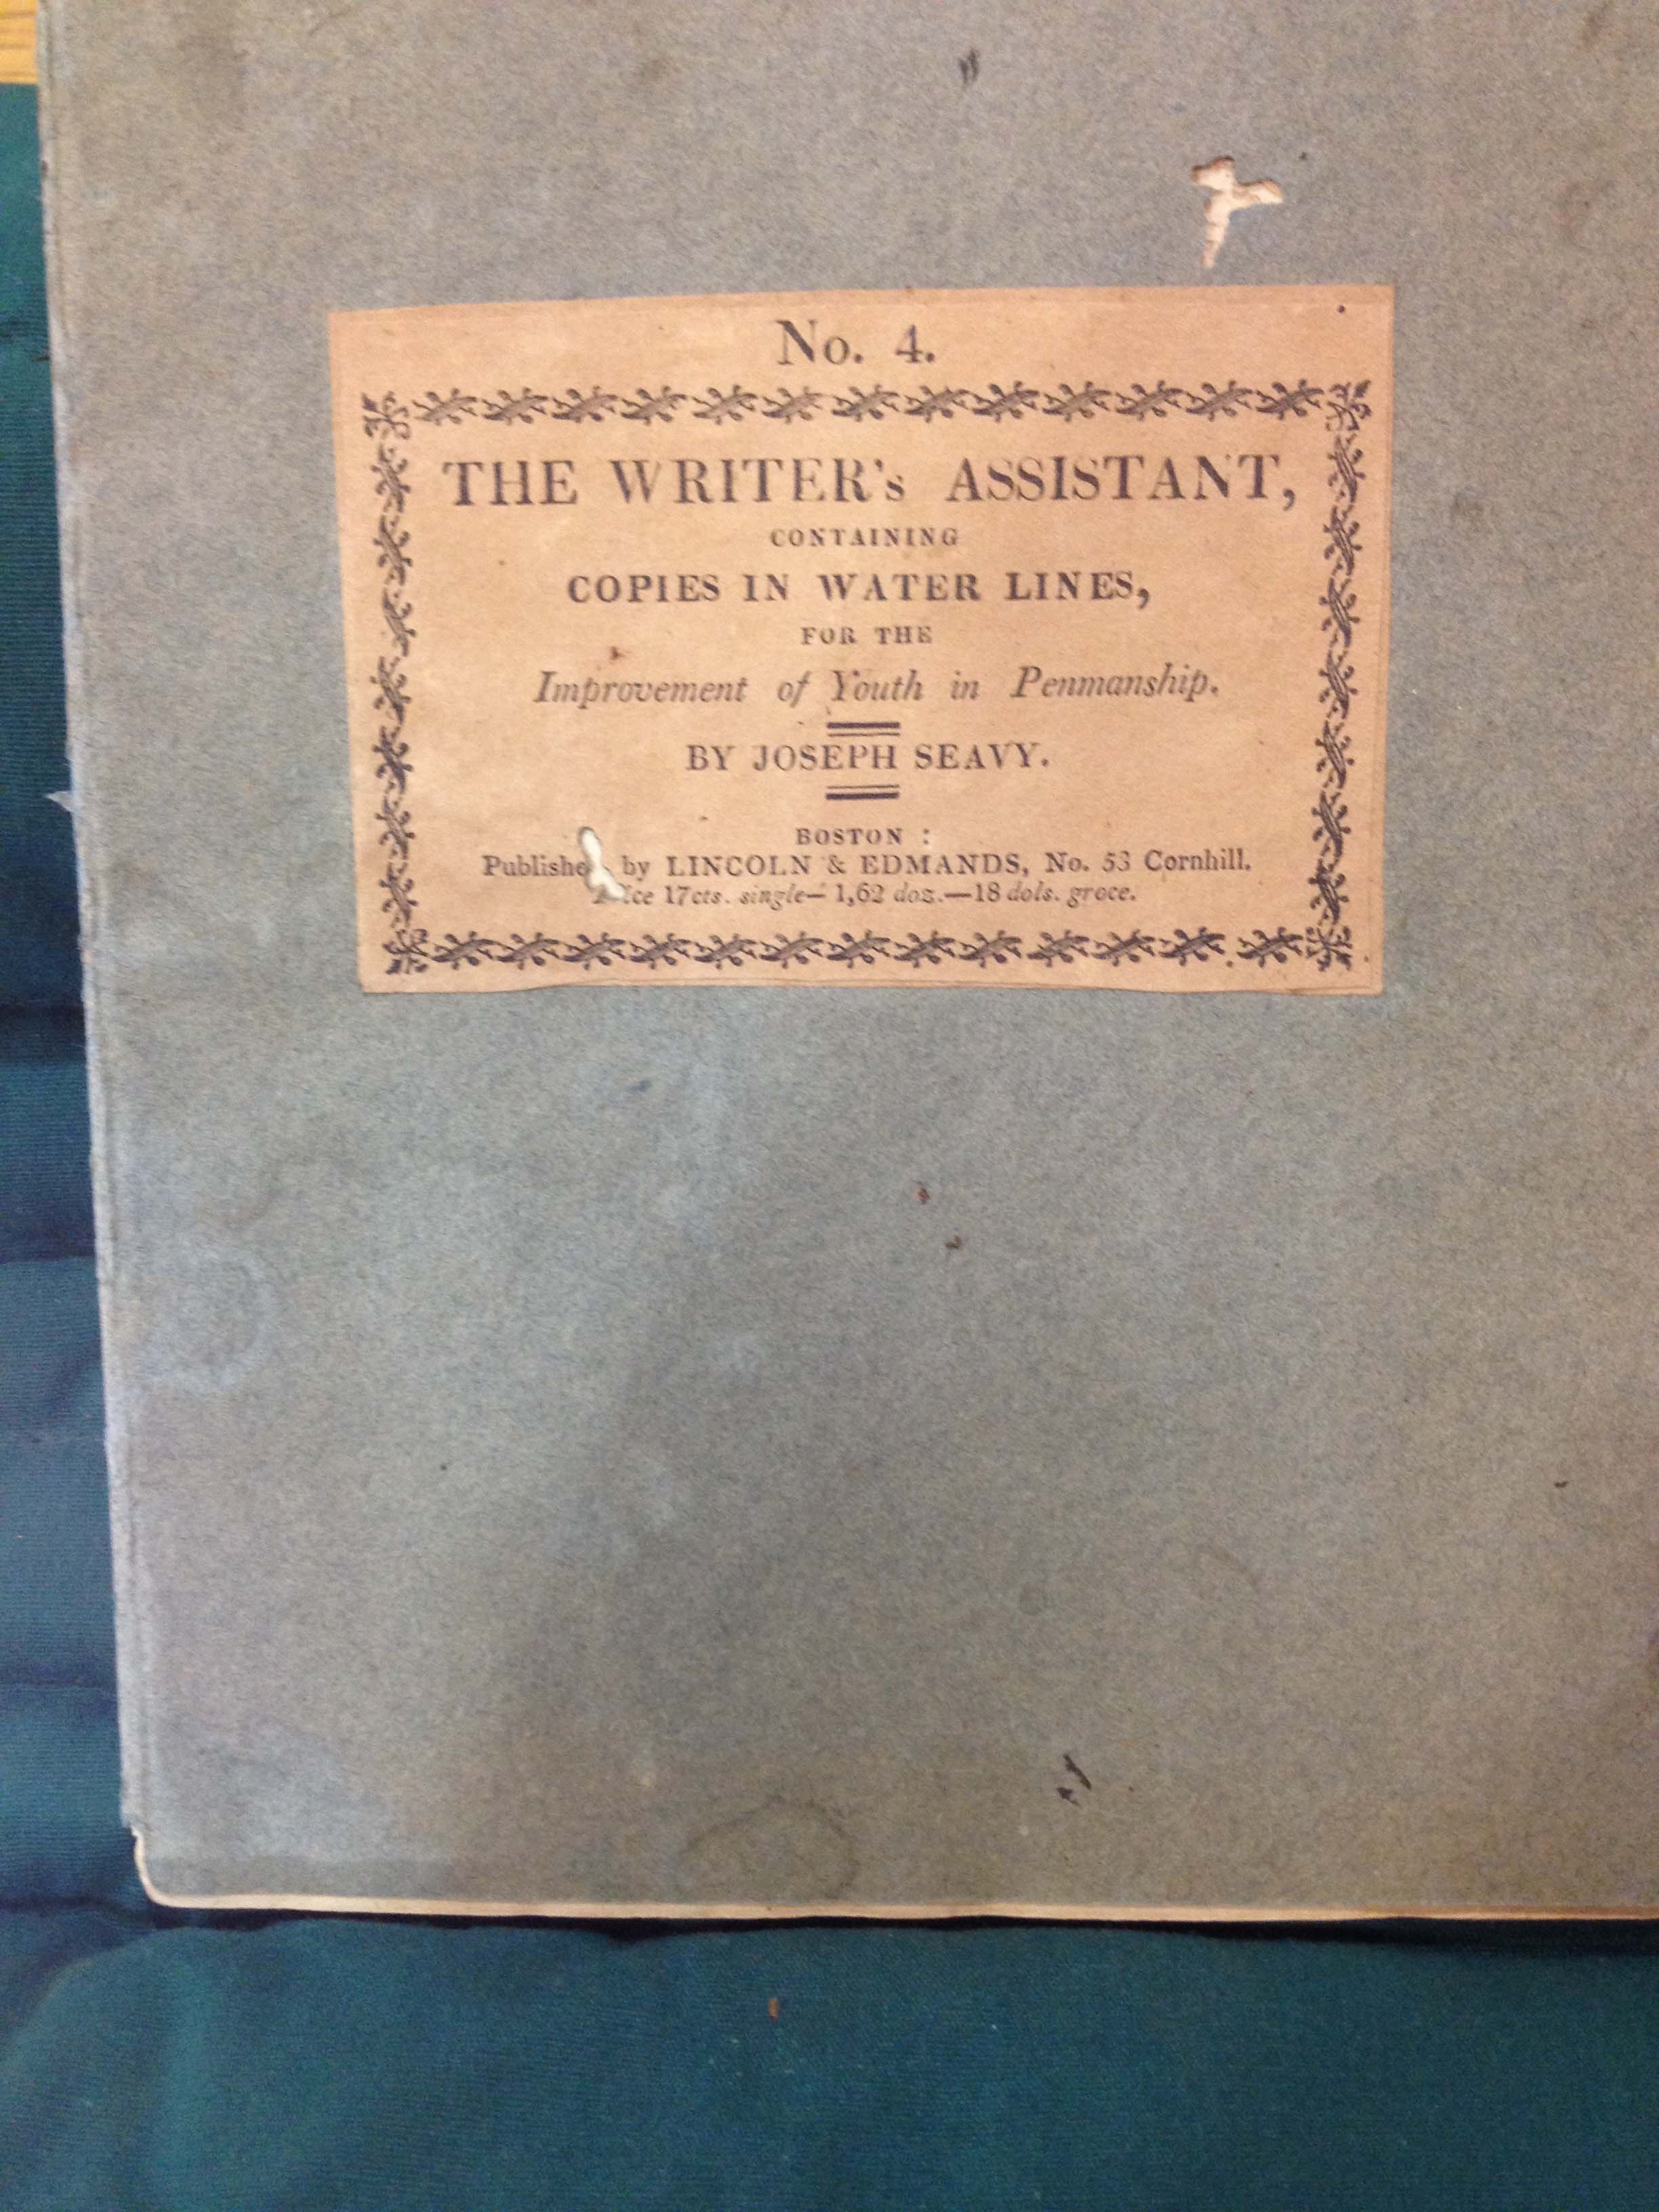 The Writer's Assistant by Joseph Seavy. Boston 1814 Newberry Library Case Wing Z43 .S43 1814